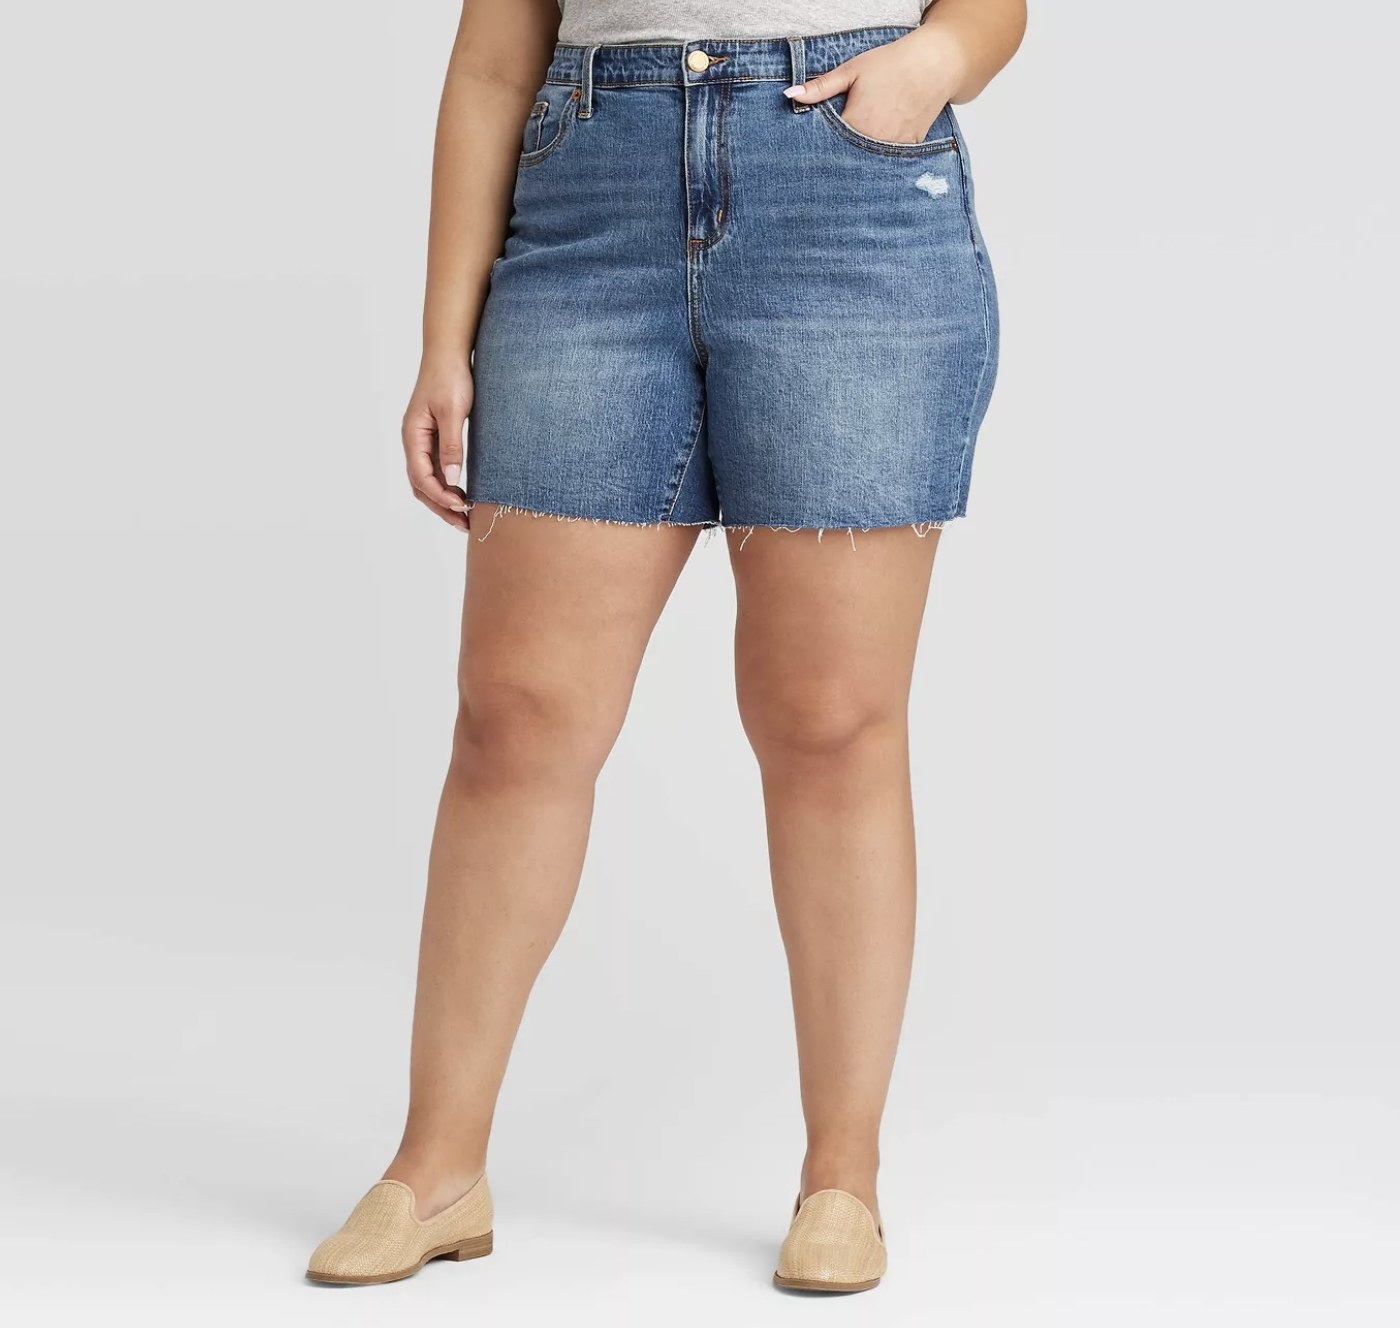 31 Pieces Of Plus-Size Clothing You Can Get At Target That Are Actually ...